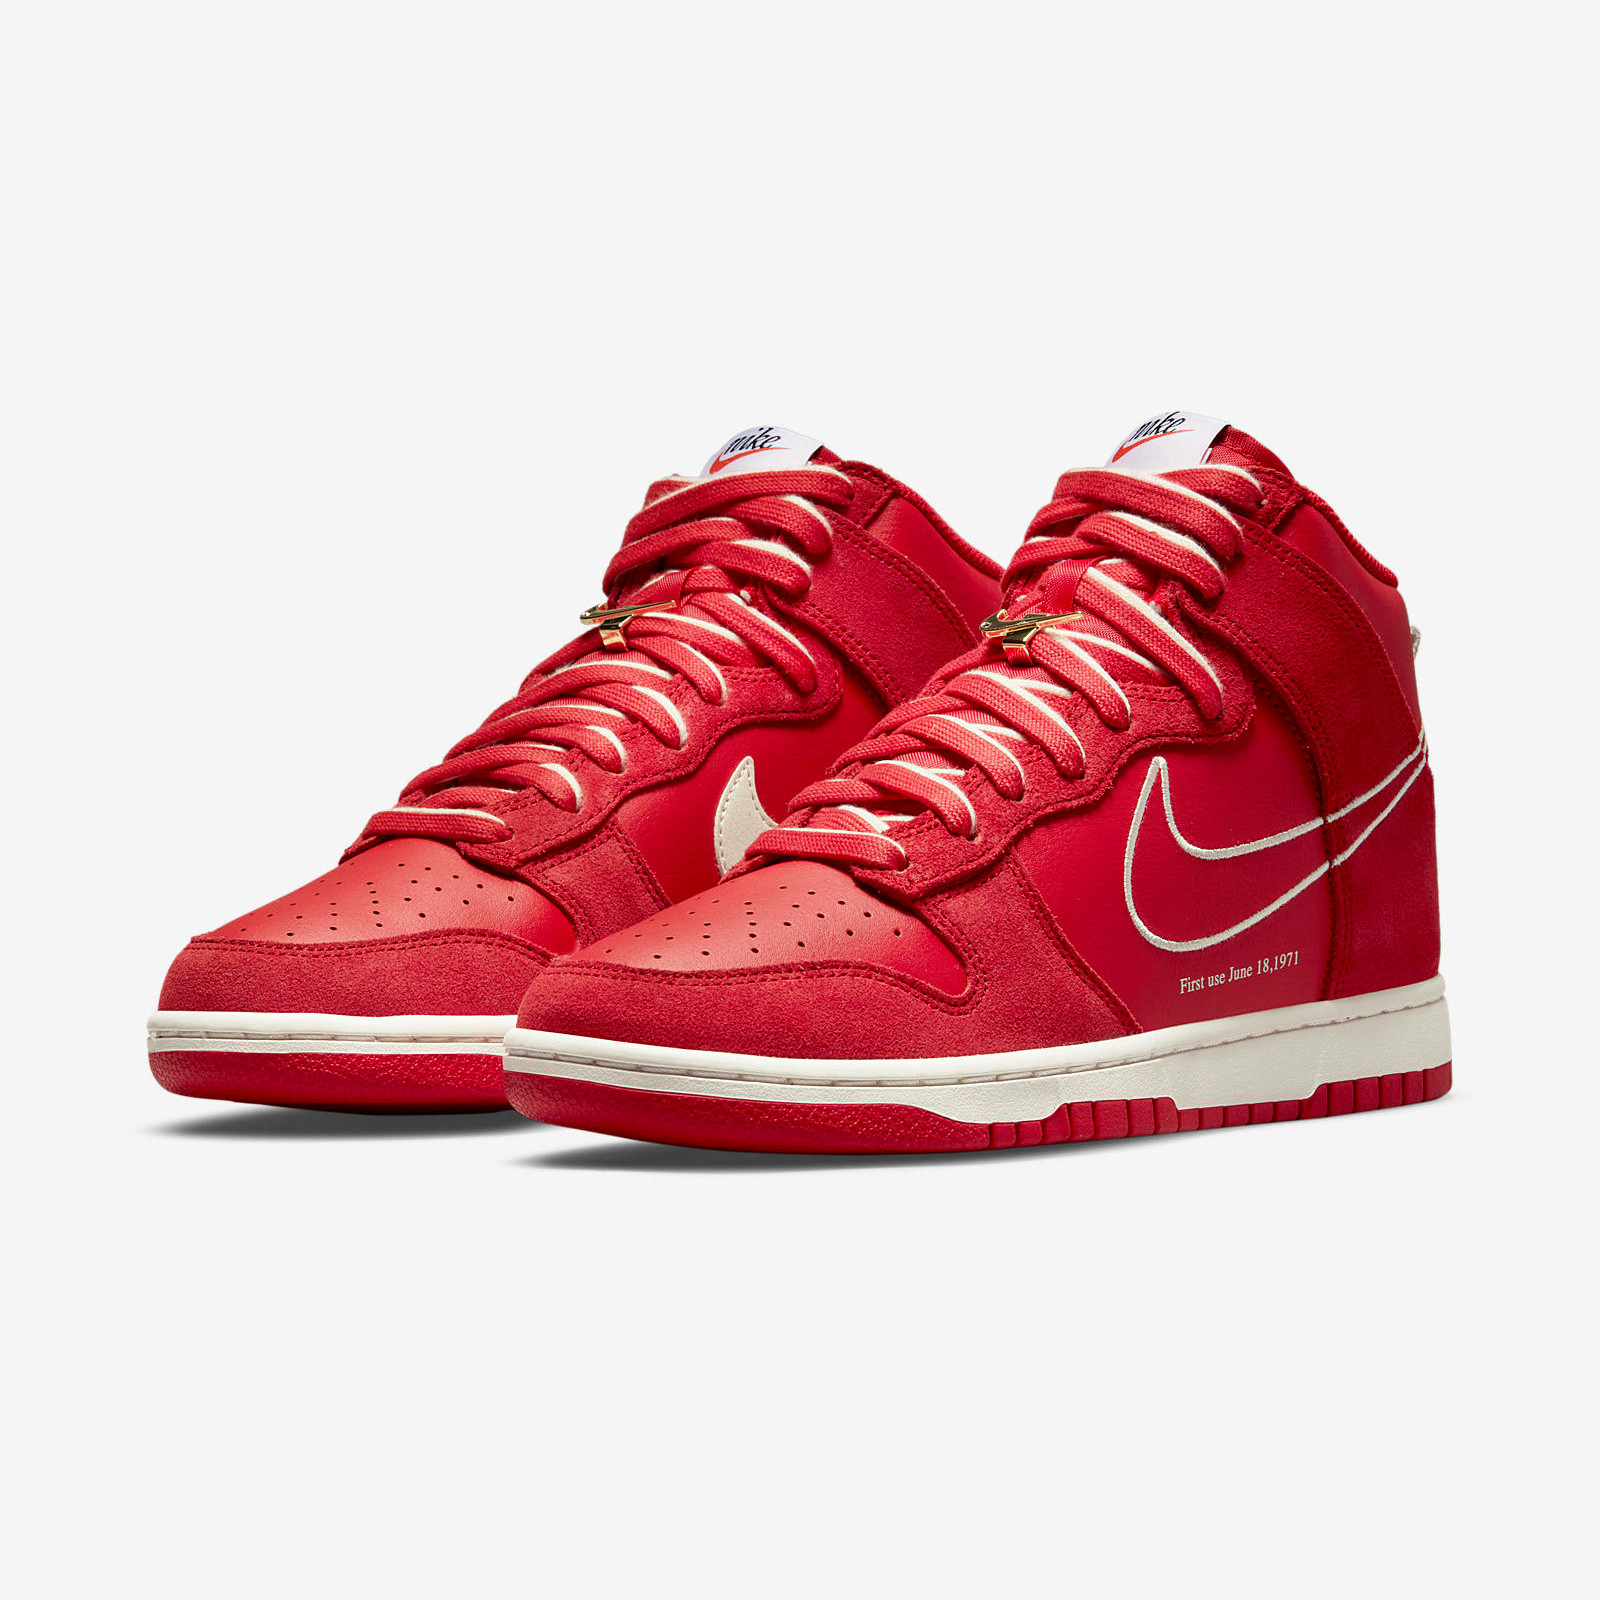 Nike Dunk High
First Use Red